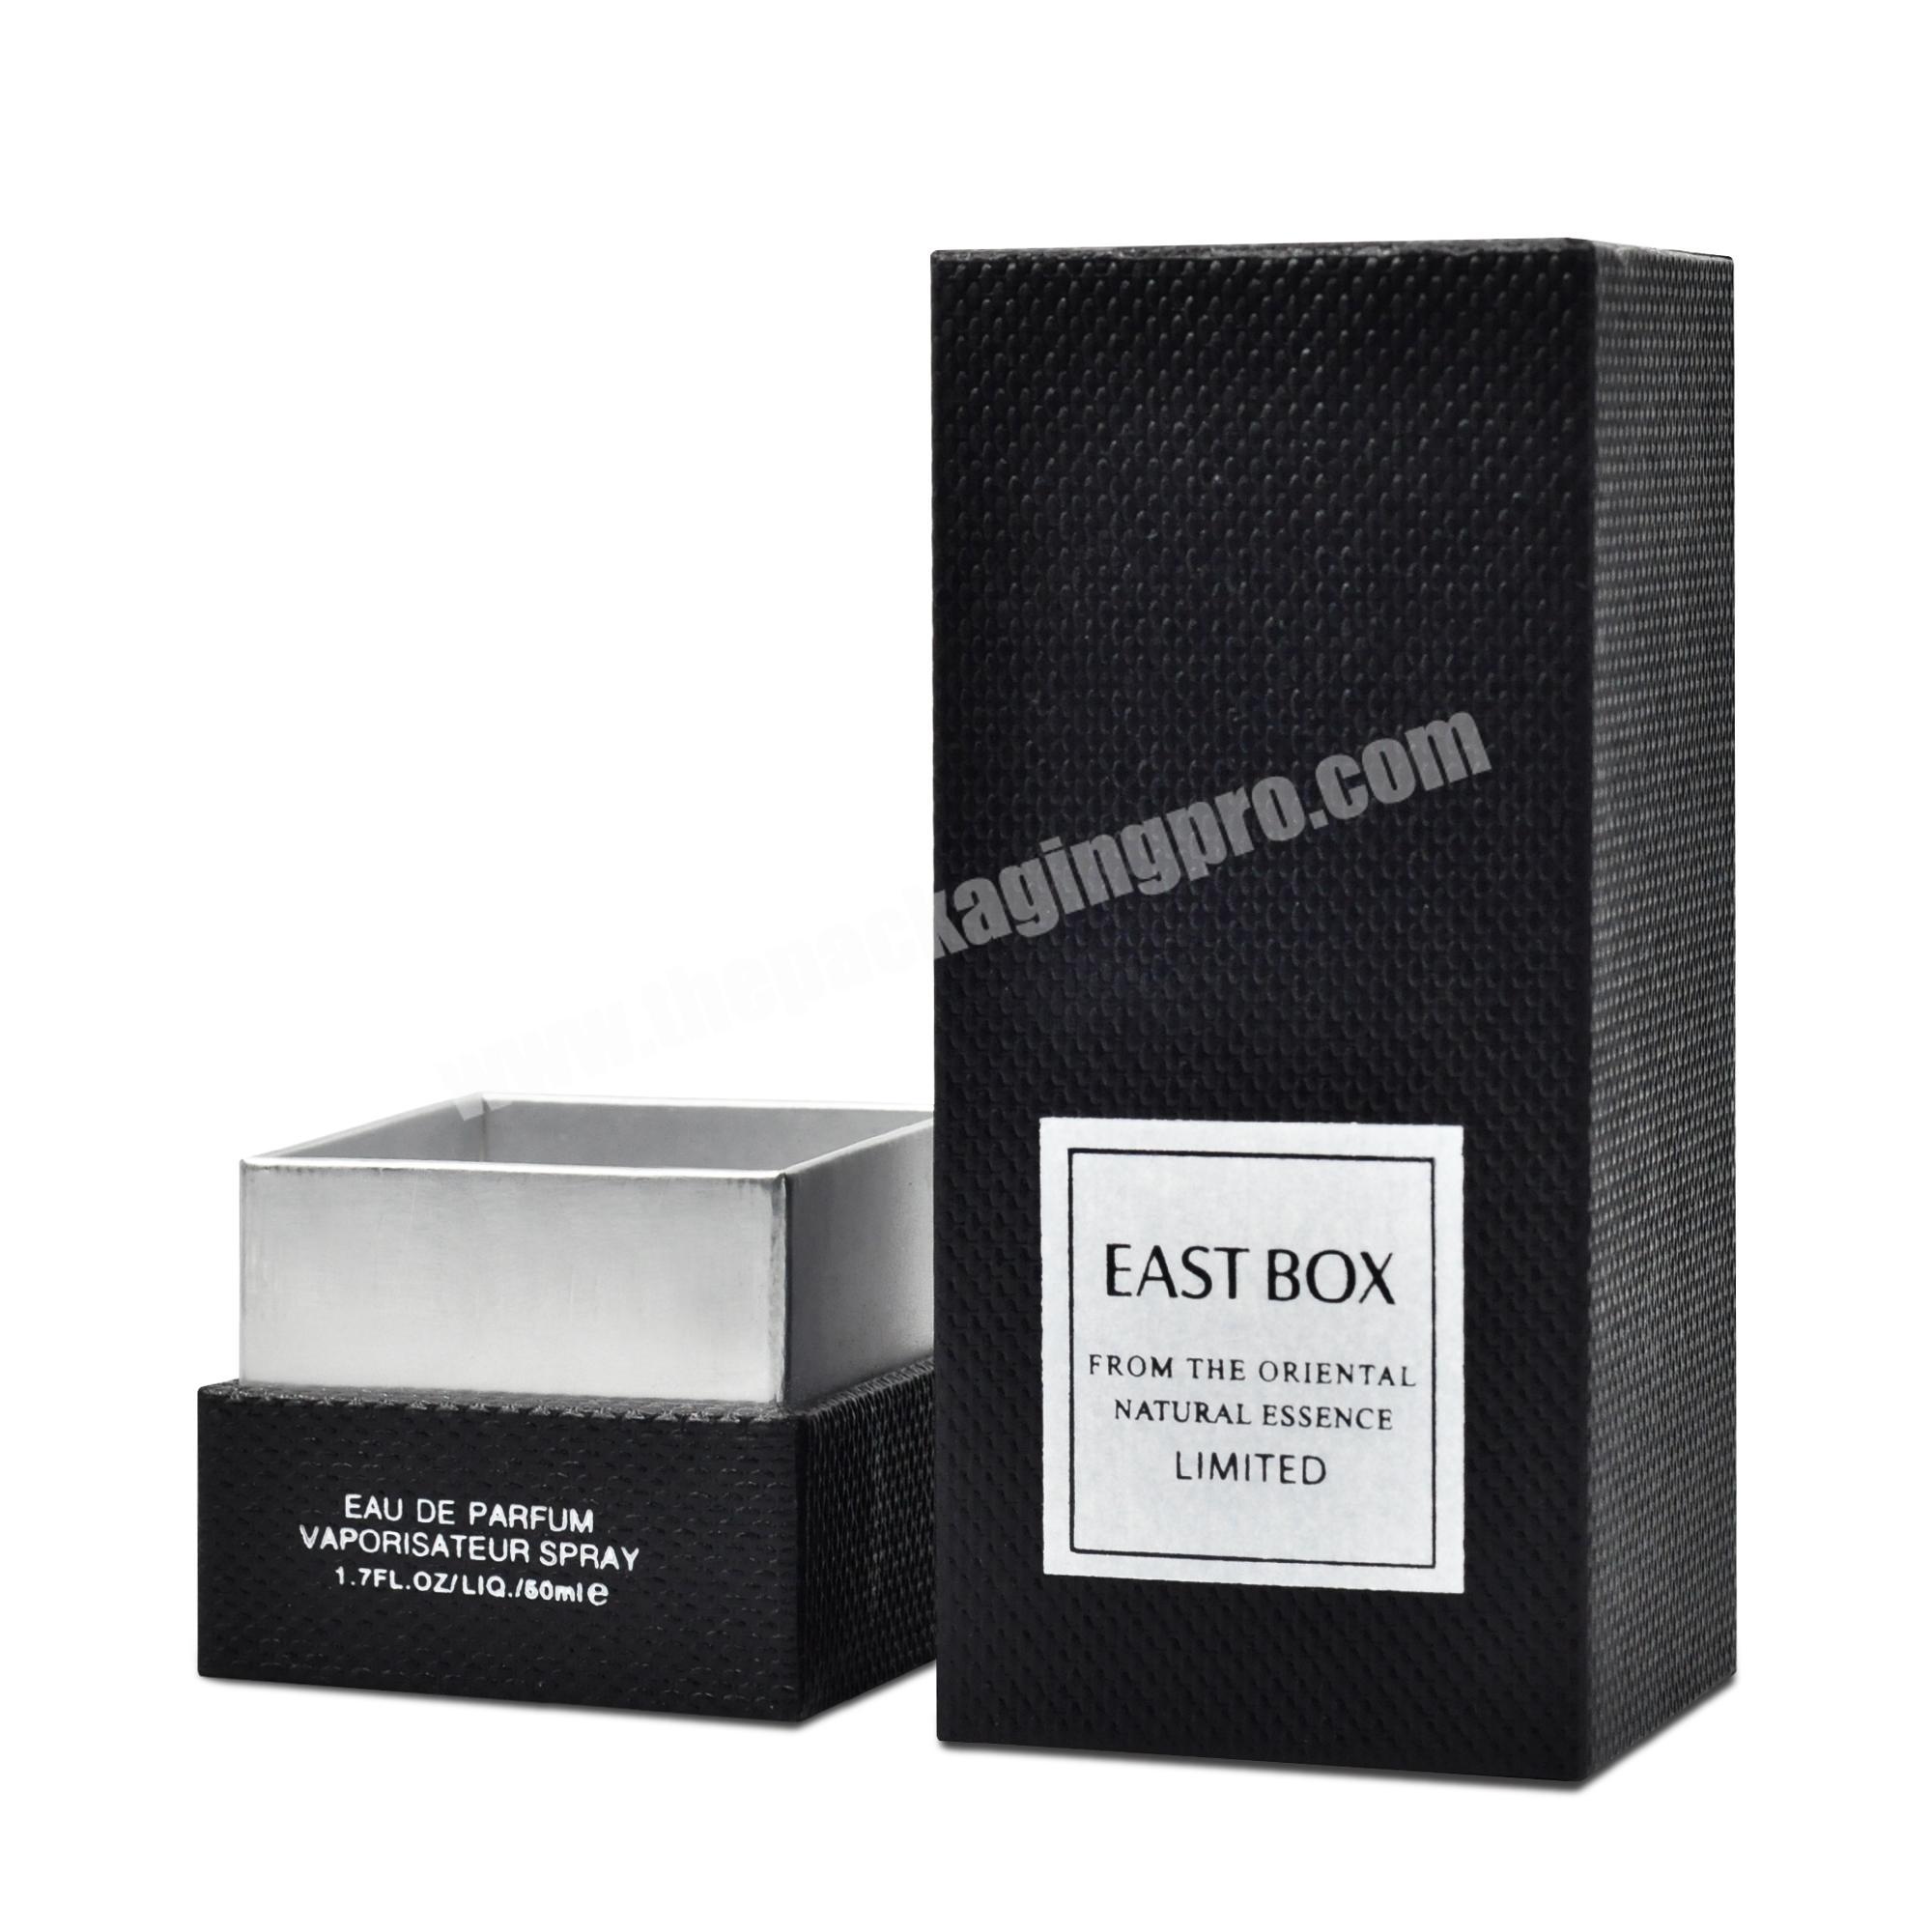 Wholesale Luxury Up-to-date styling bottle box essential box Personalized design Luxury wine box